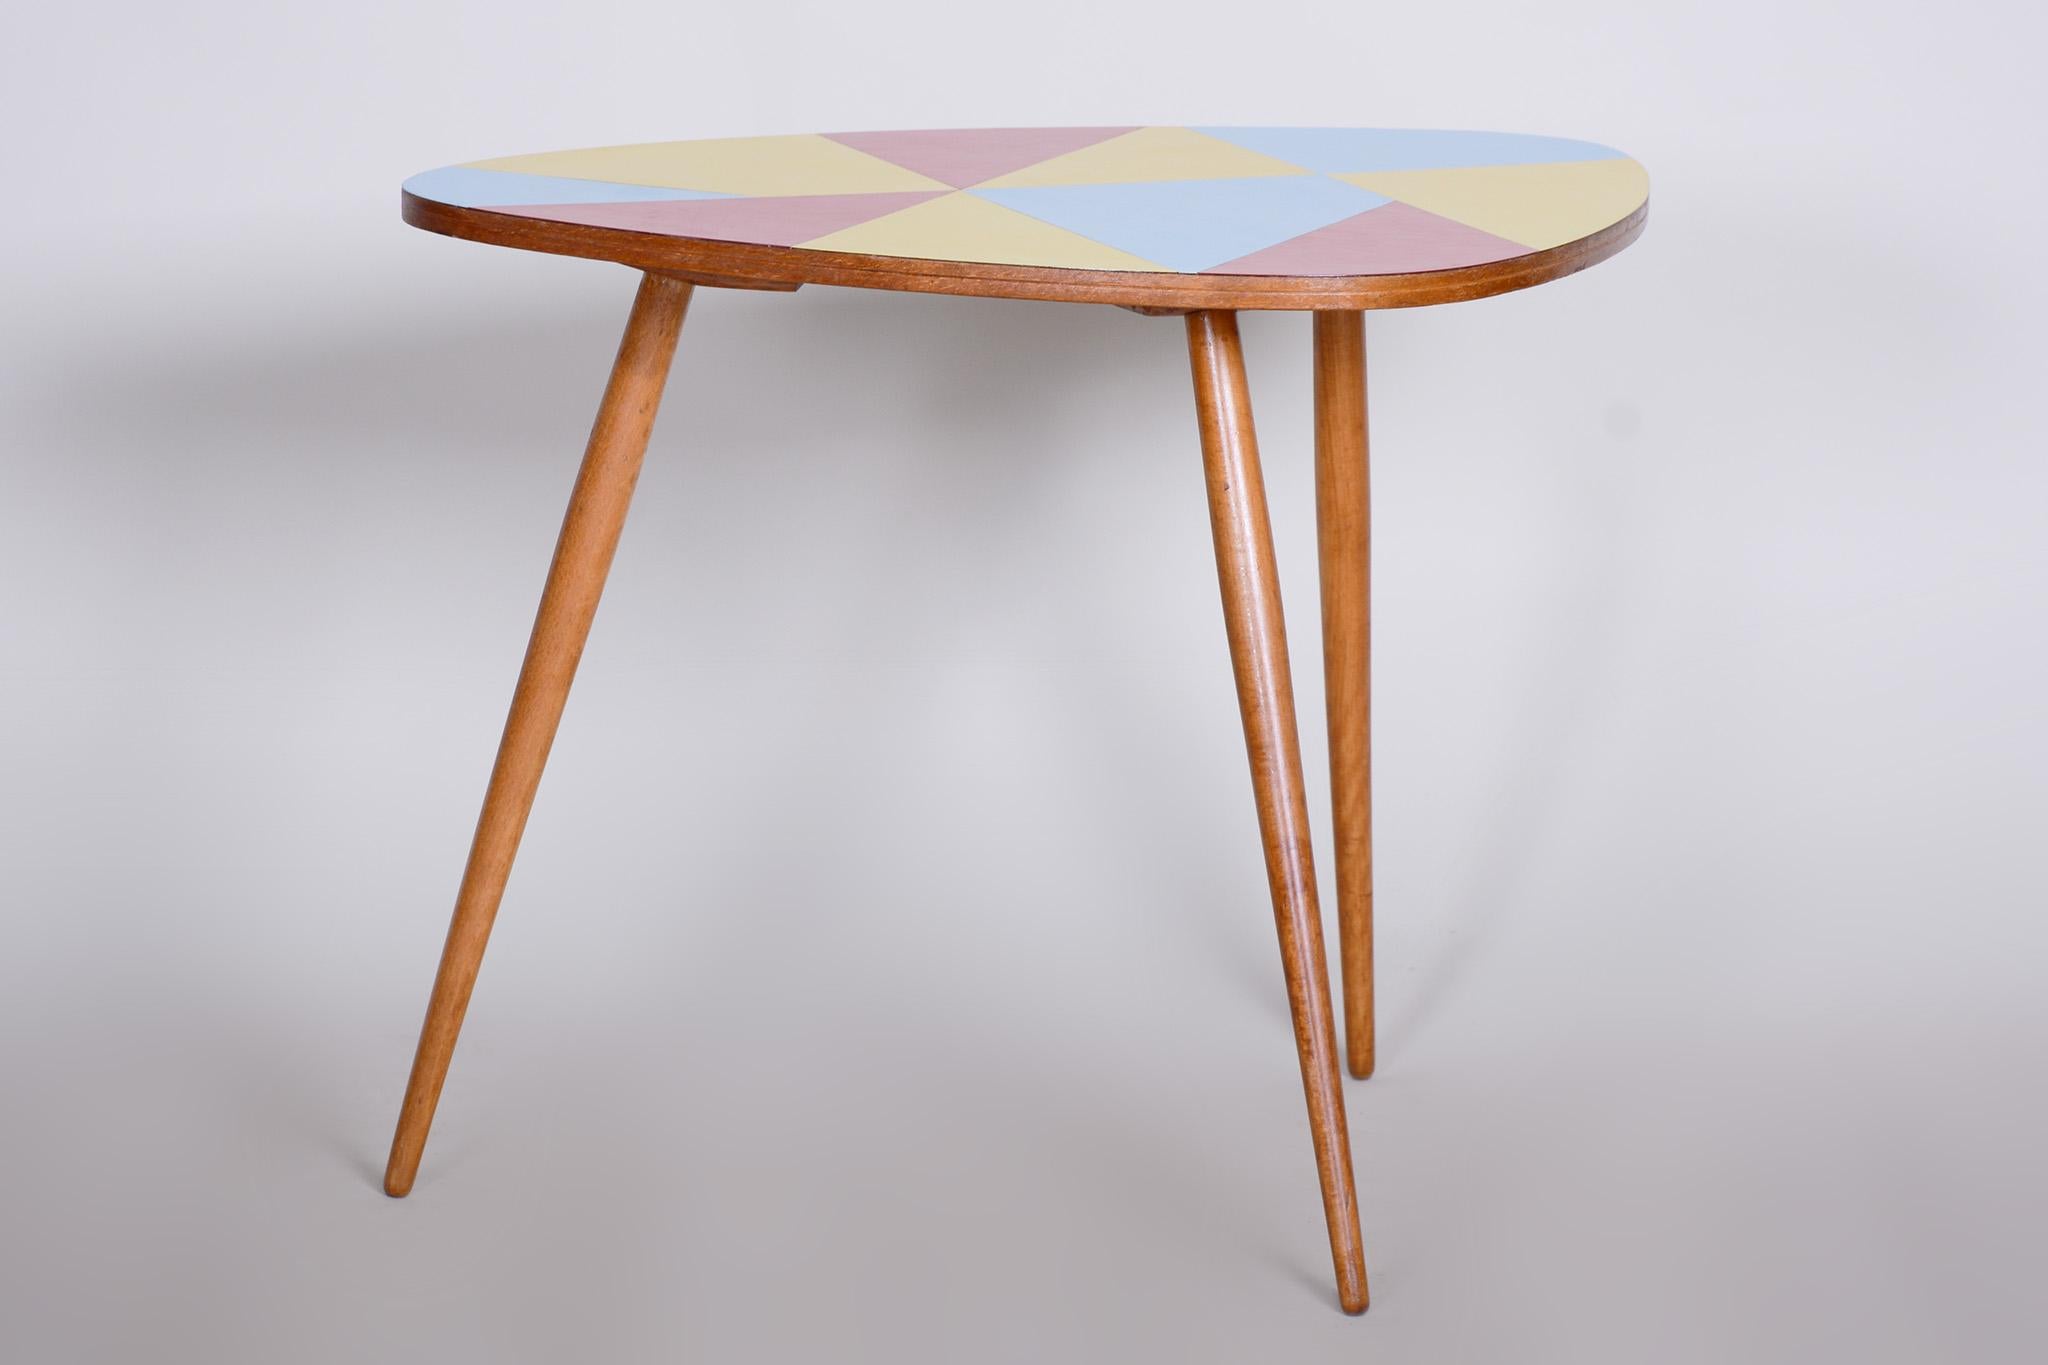 Small table.
Czech midcentury
Material: Formica and beech
Period: 1950-1959.